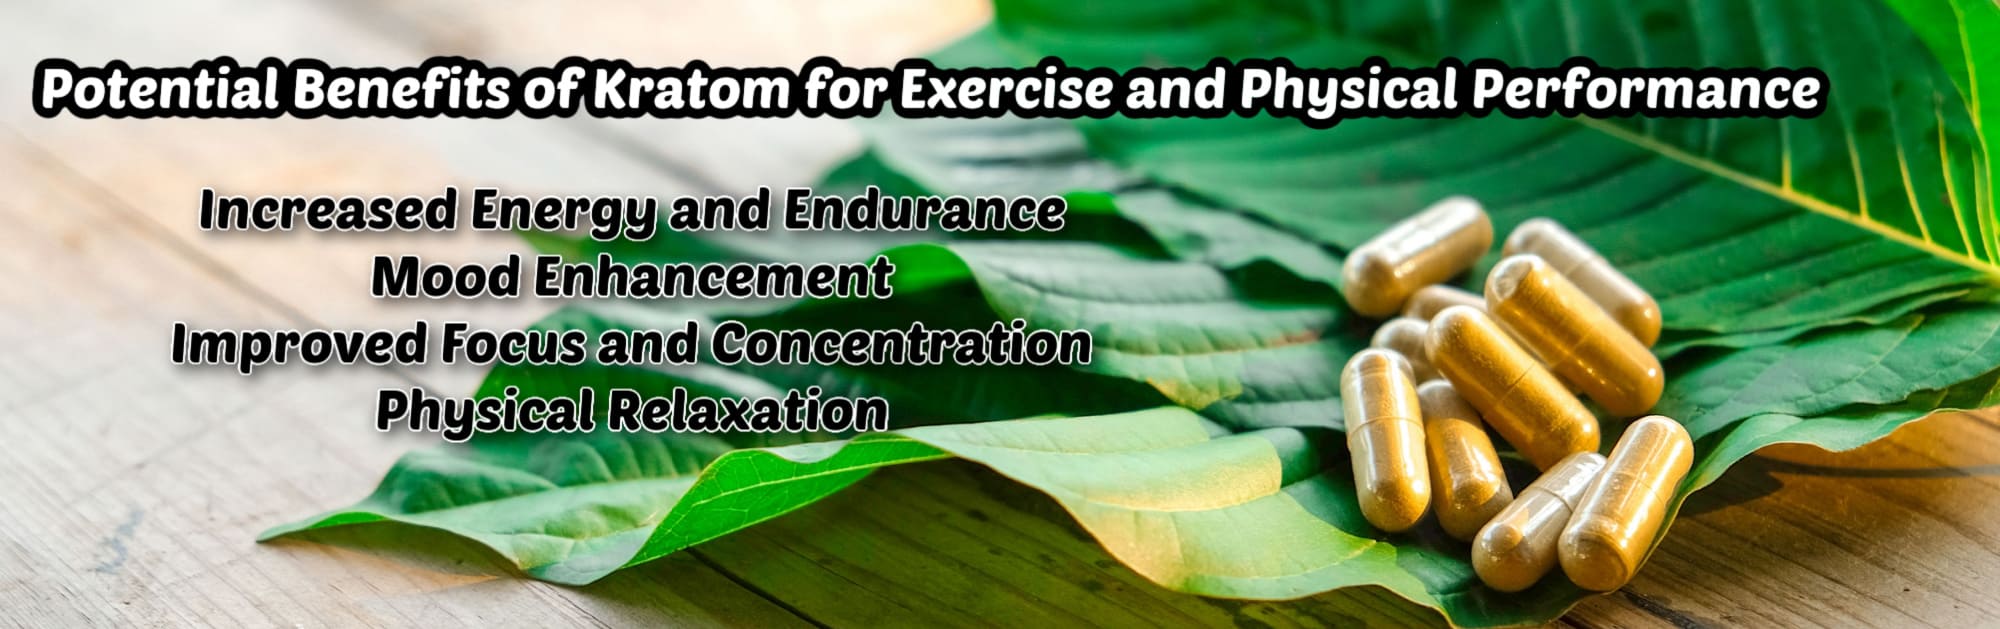 image of potential benefits of kratom for exercise and physical performance